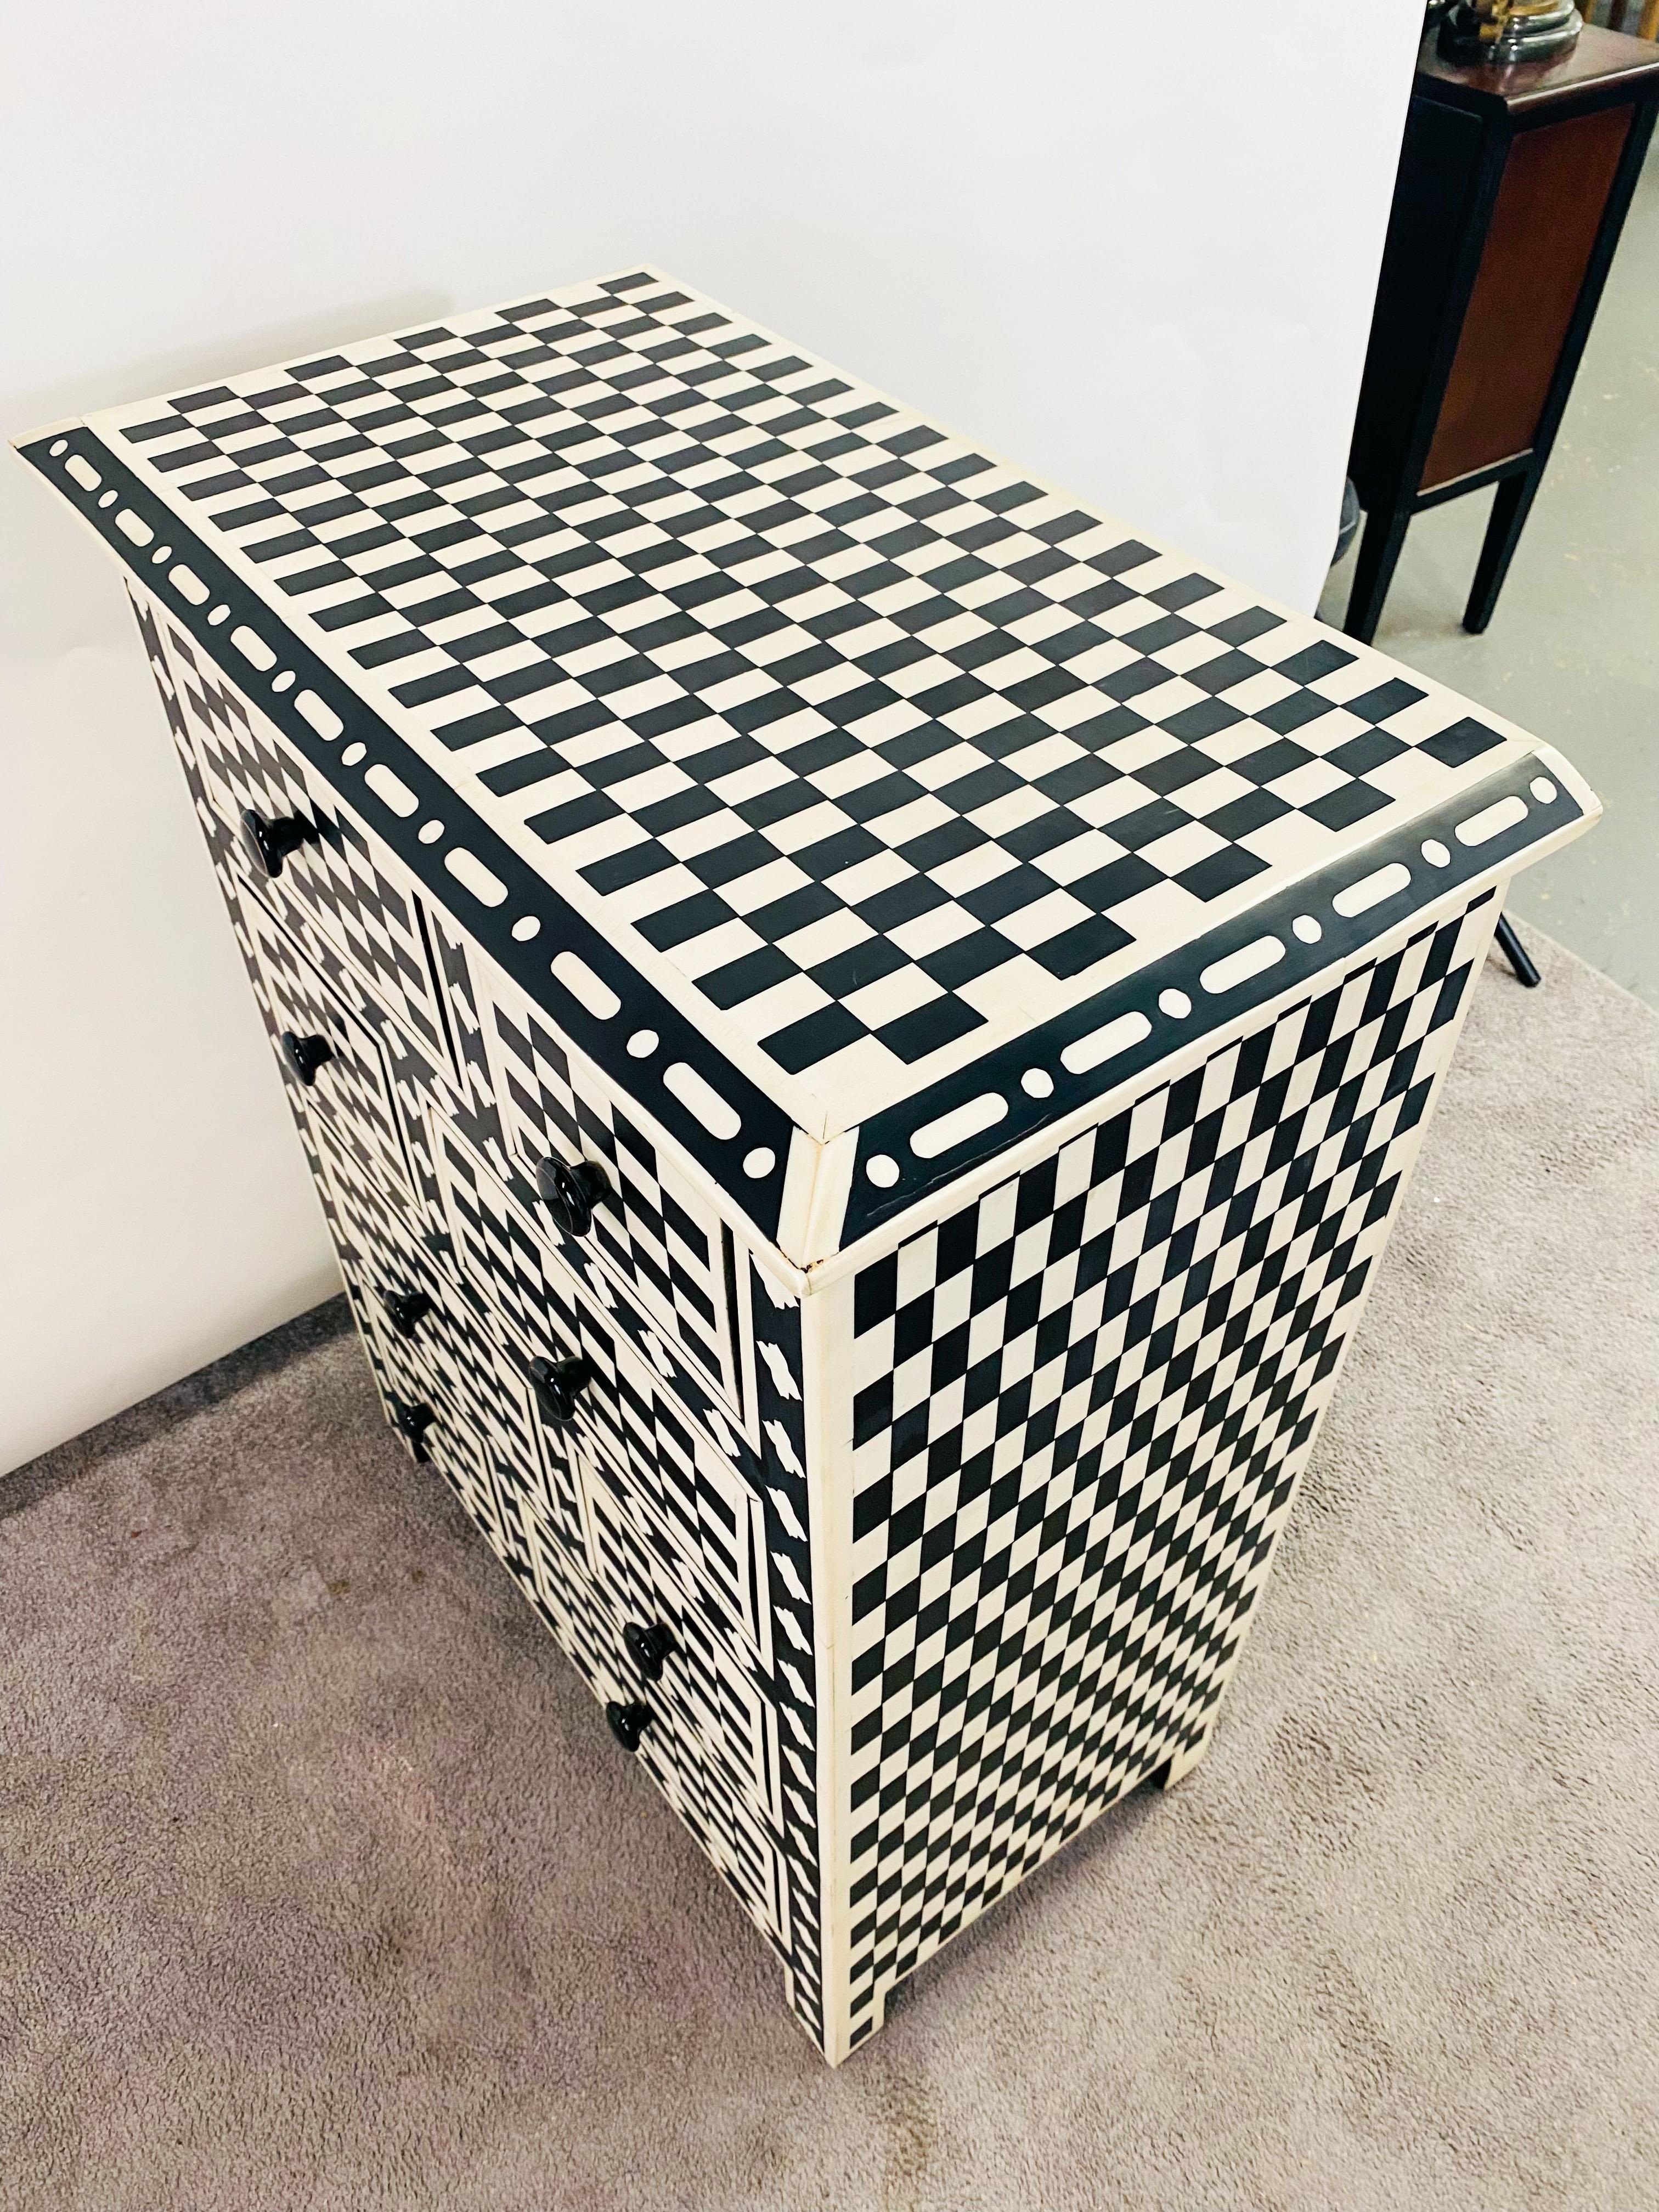 Art Deco Style Black and White Checkers Design Dresser, Chest or Commode For Sale 7